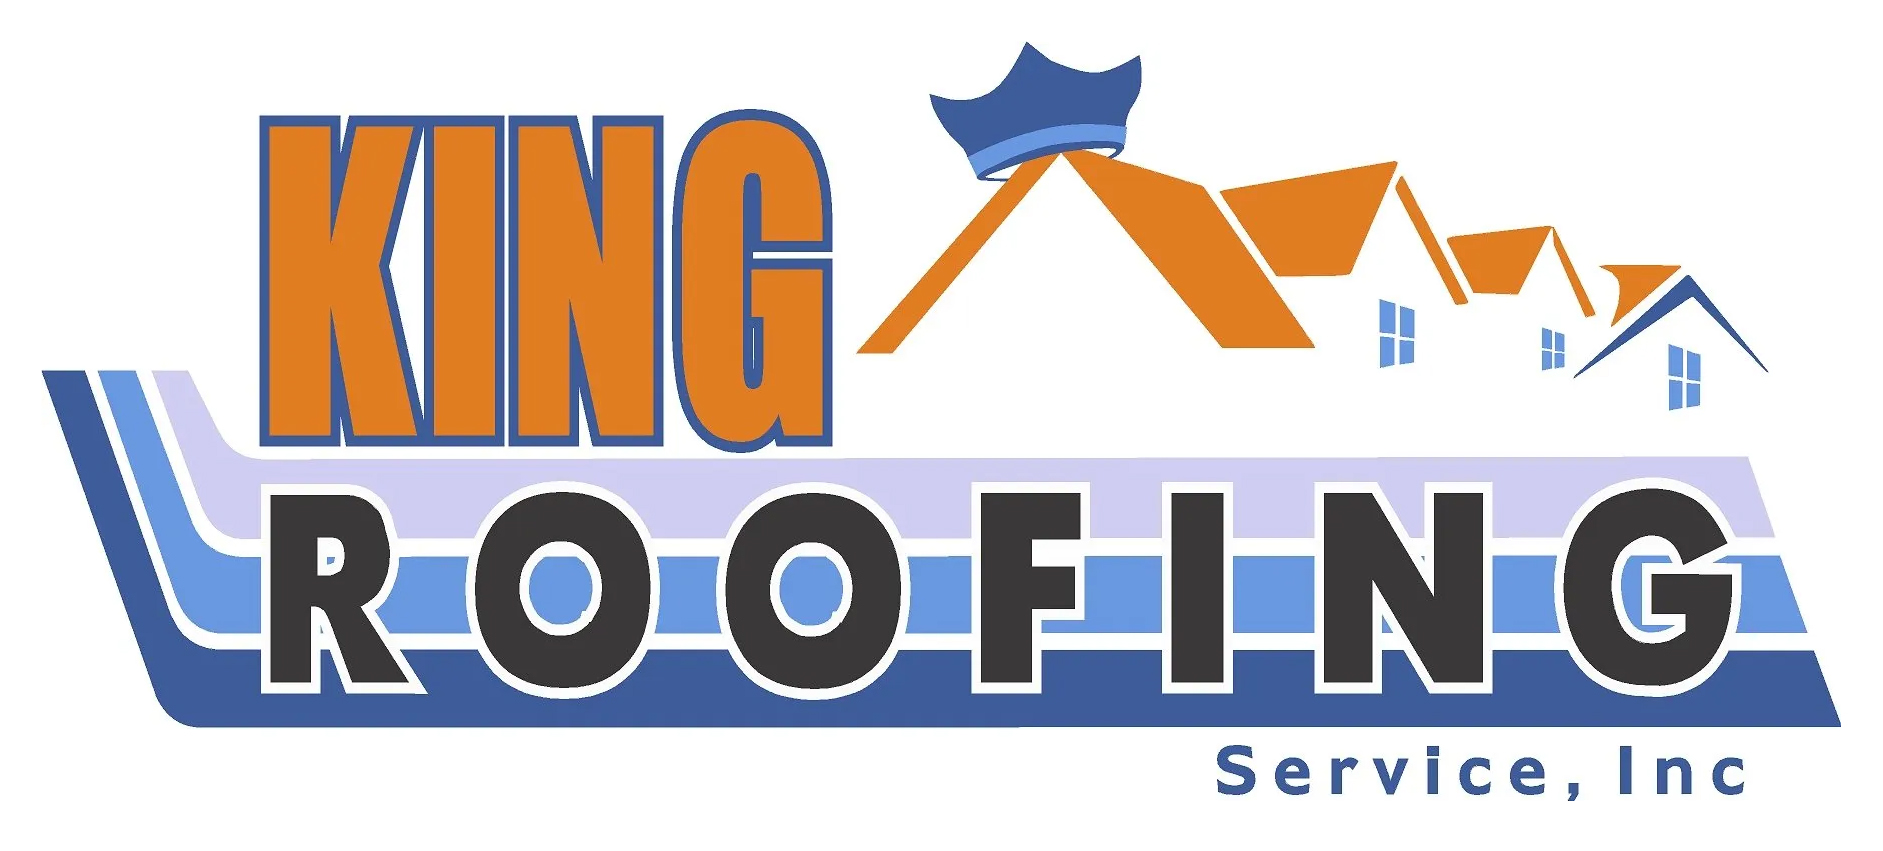 King Roofing Service, Inc. - Logo